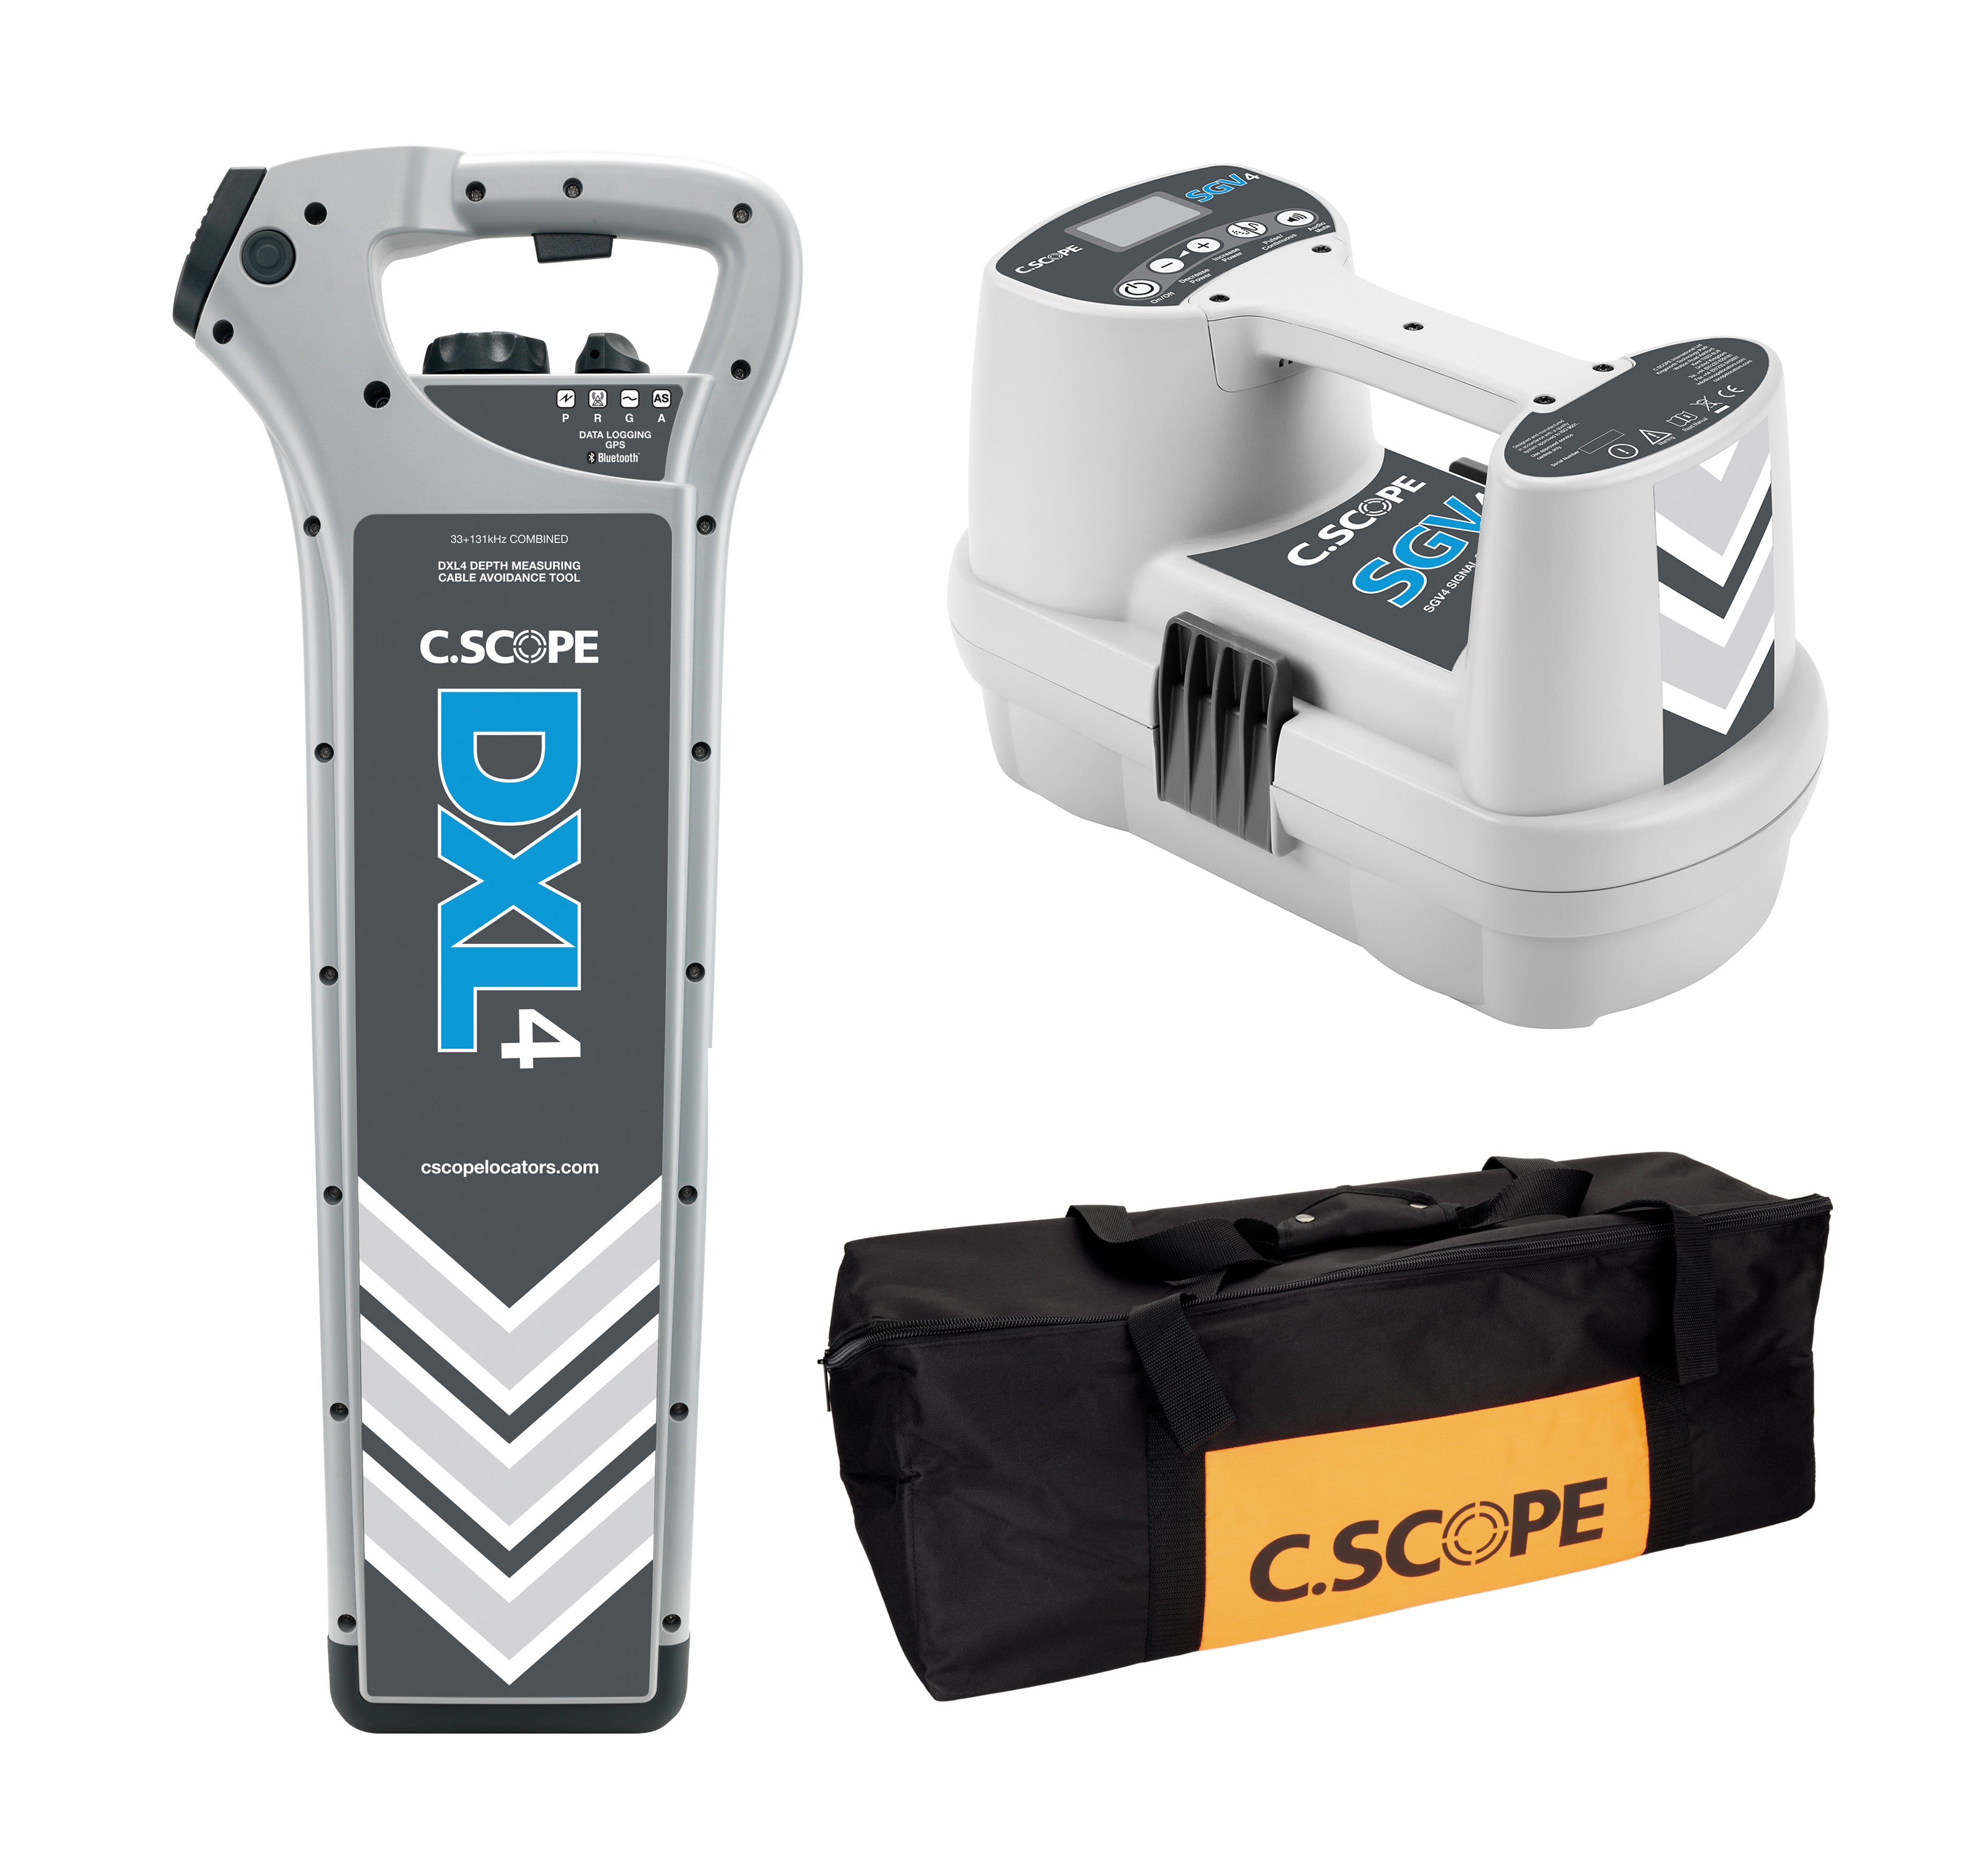 C.Scope DXL4-D Depth and Datalogging Cable Avoidance Kit with SGV4 and Bag - Subtech Safety Limited